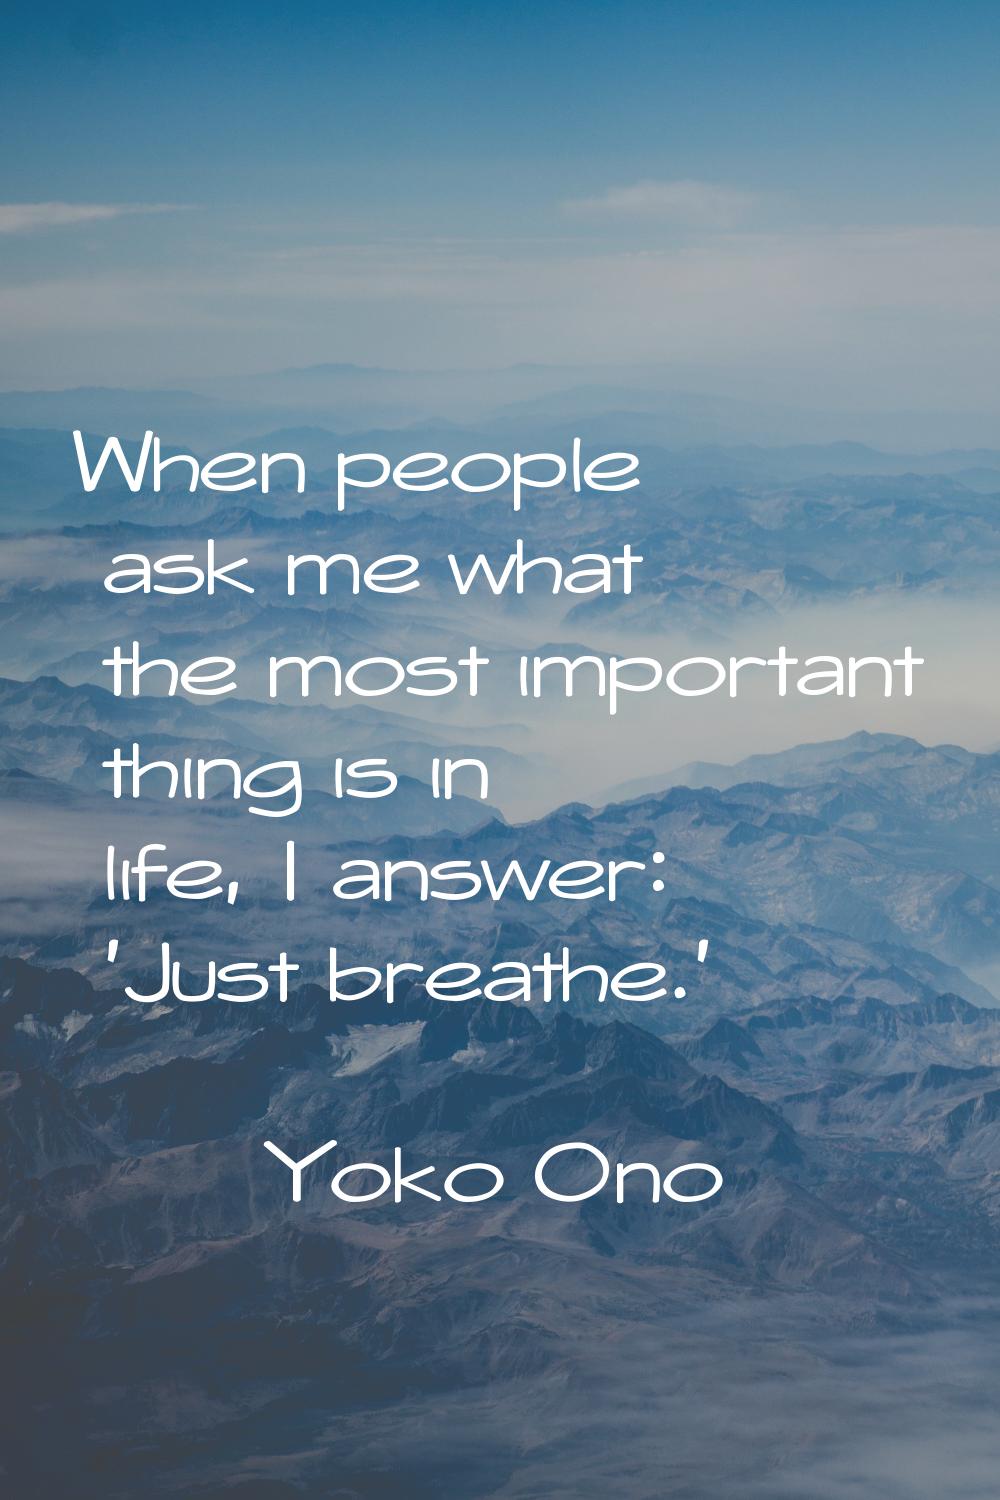 When people ask me what the most important thing is in life, I answer: 'Just breathe.'